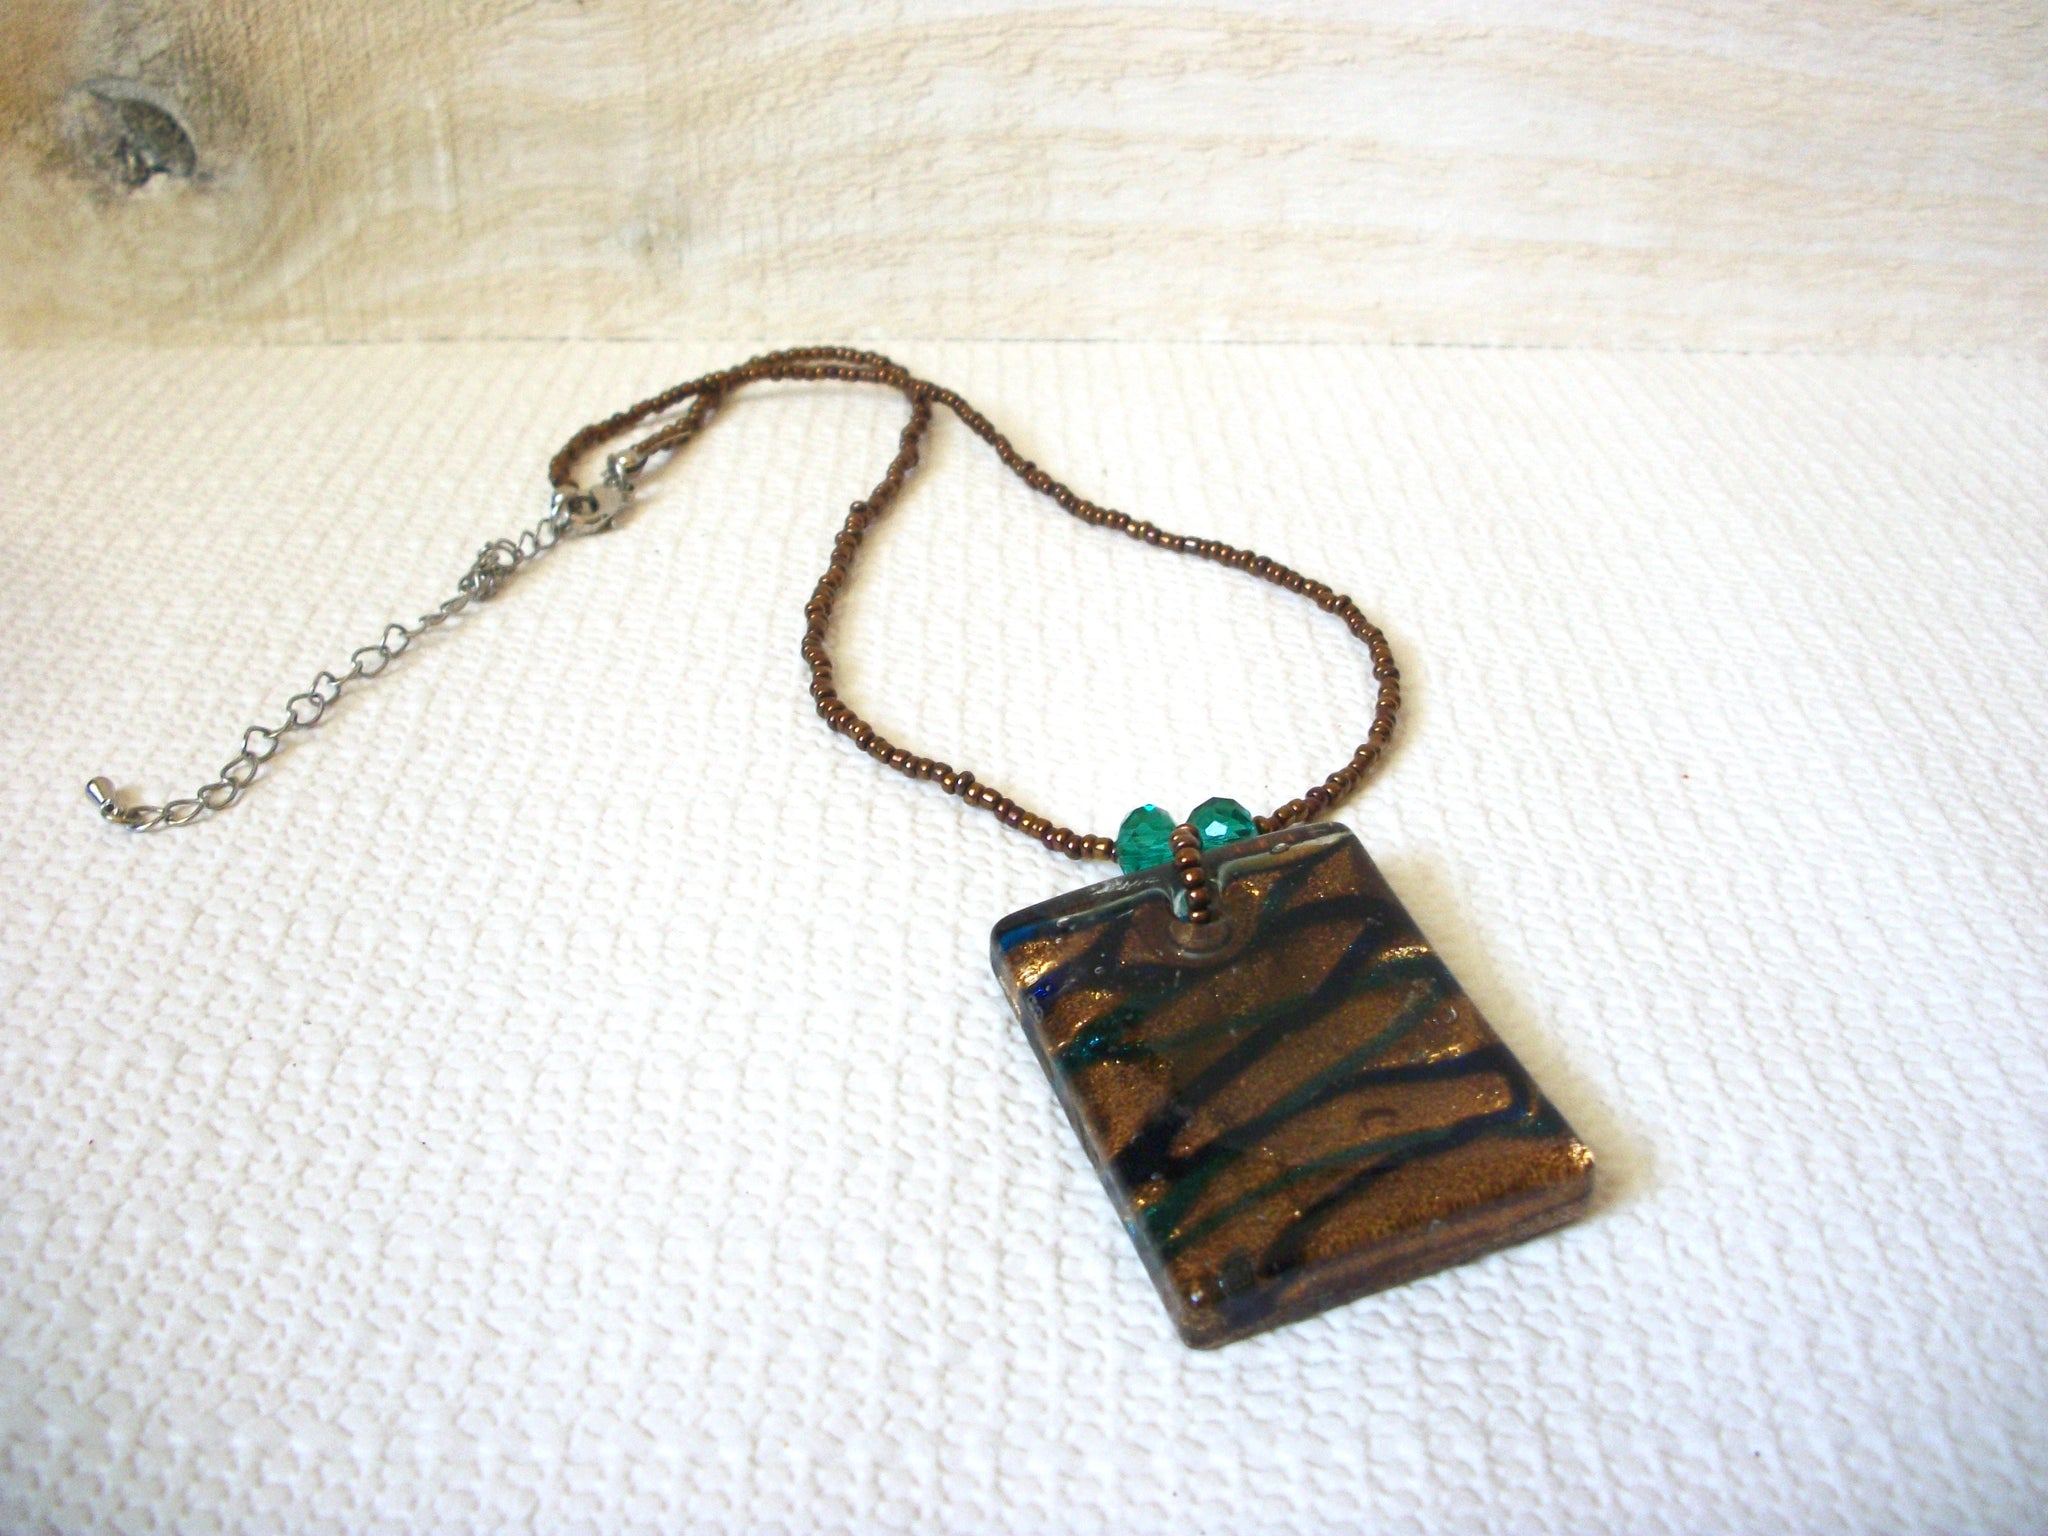 Dichroic Glass Necklace 51020